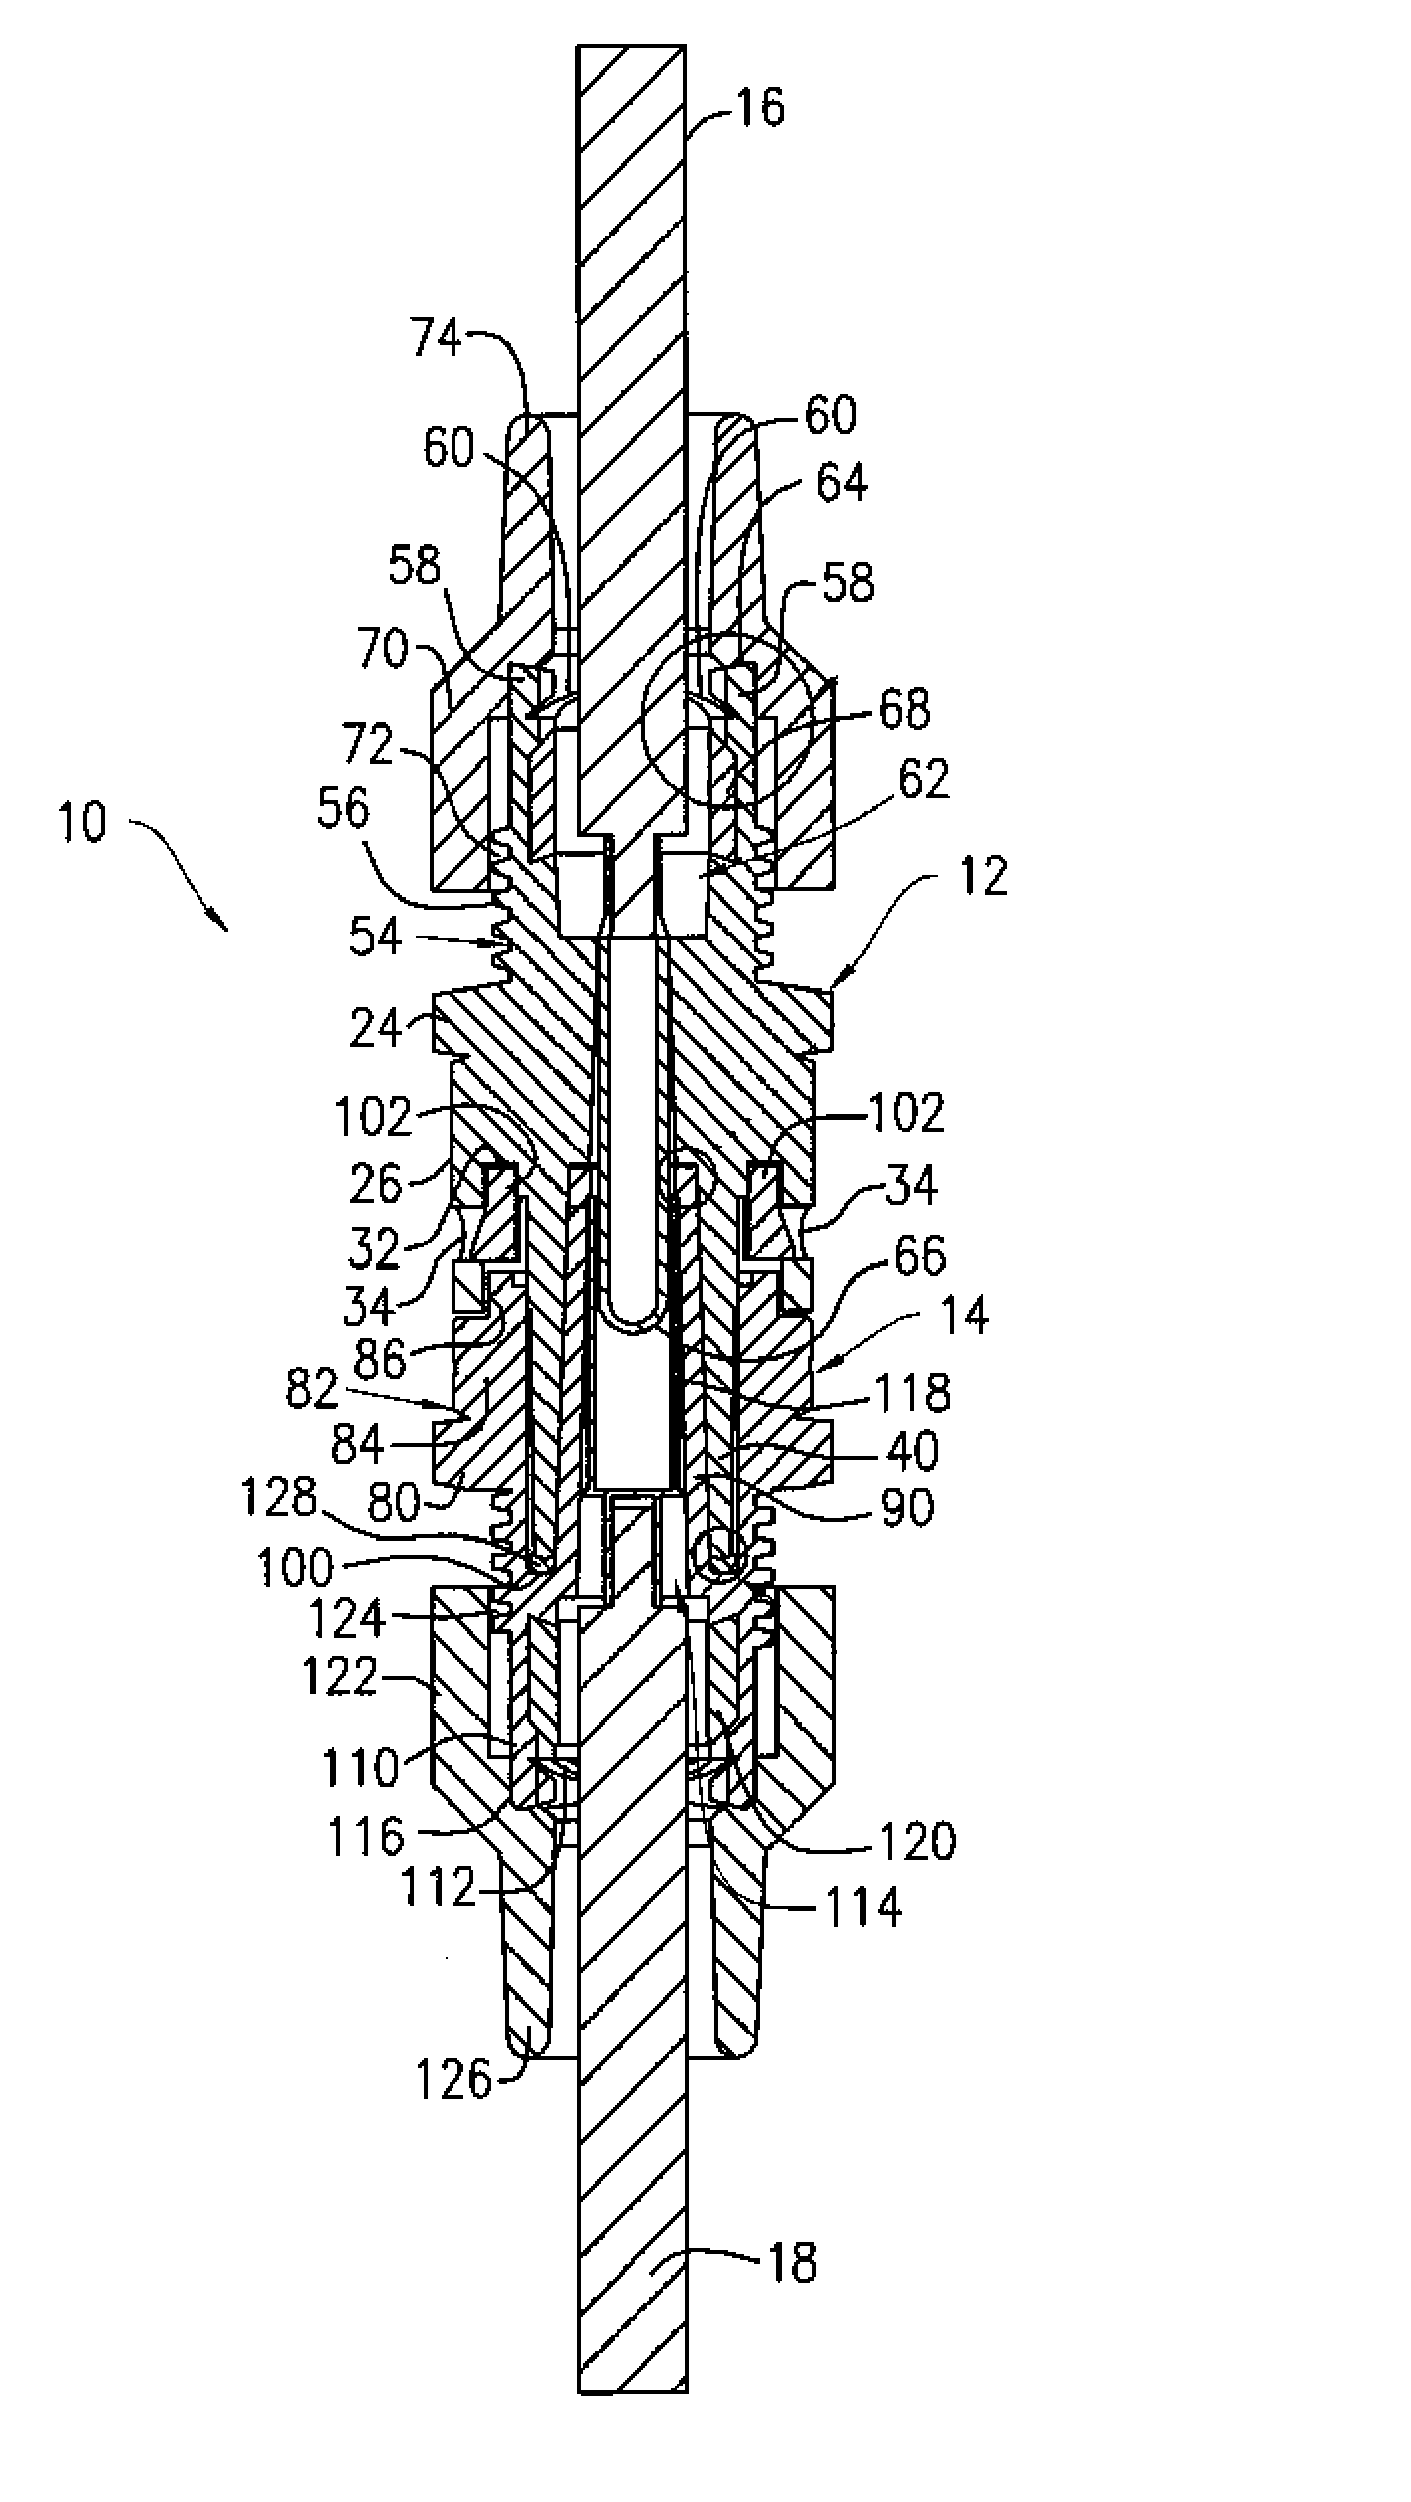 Electrical connectors for photovoltaic systems